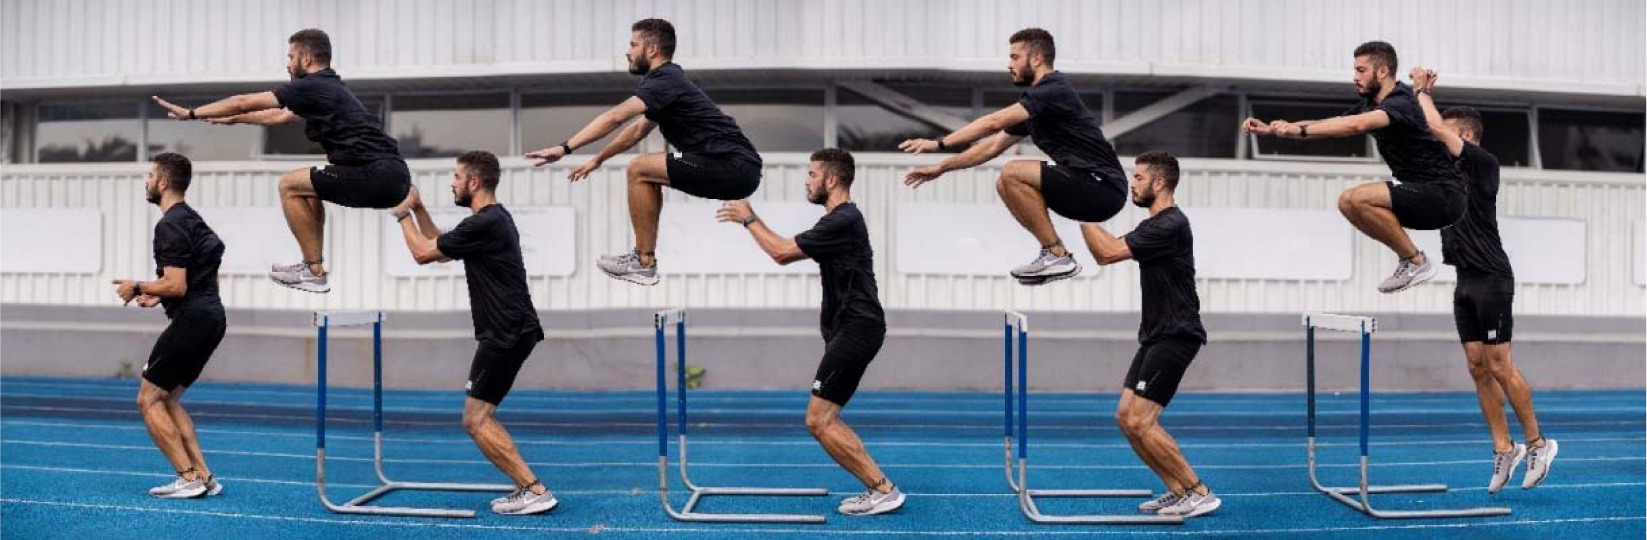 Plyometrics and jump training, part 1: working back from the sport -  Sportsmith